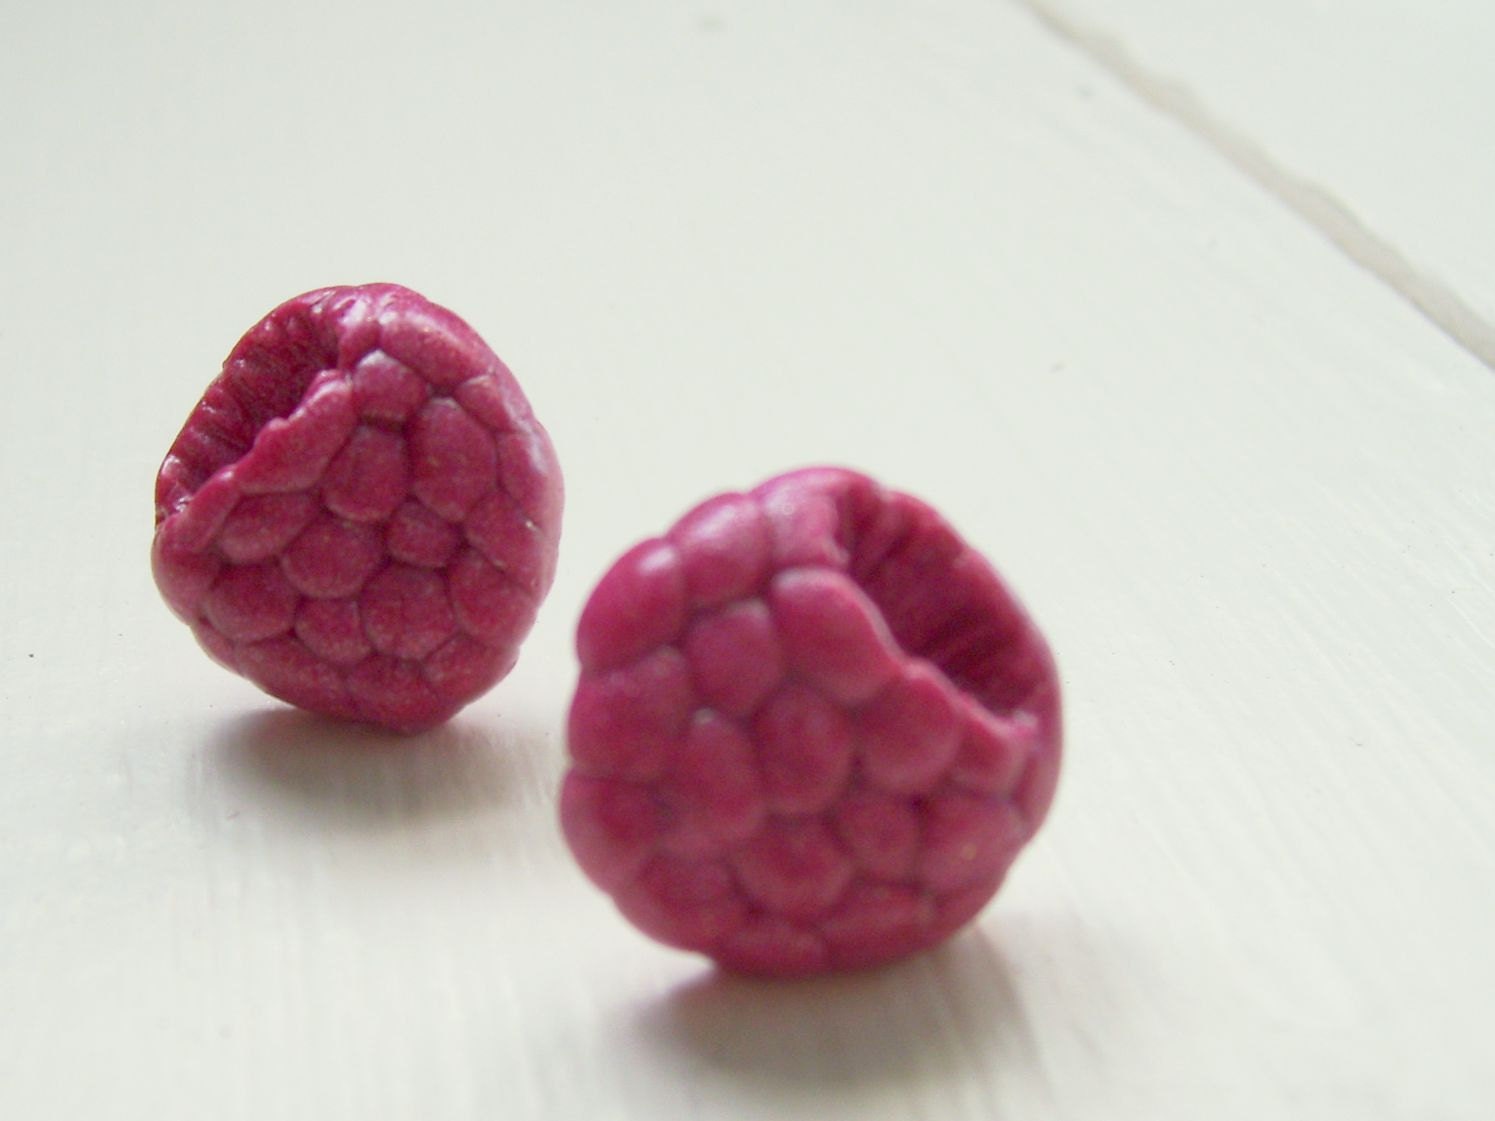 Spring Raspberry Earrings - Pink Realistic Berry Earrings - Surgical Steel Posts 1/2" - Sunsasa